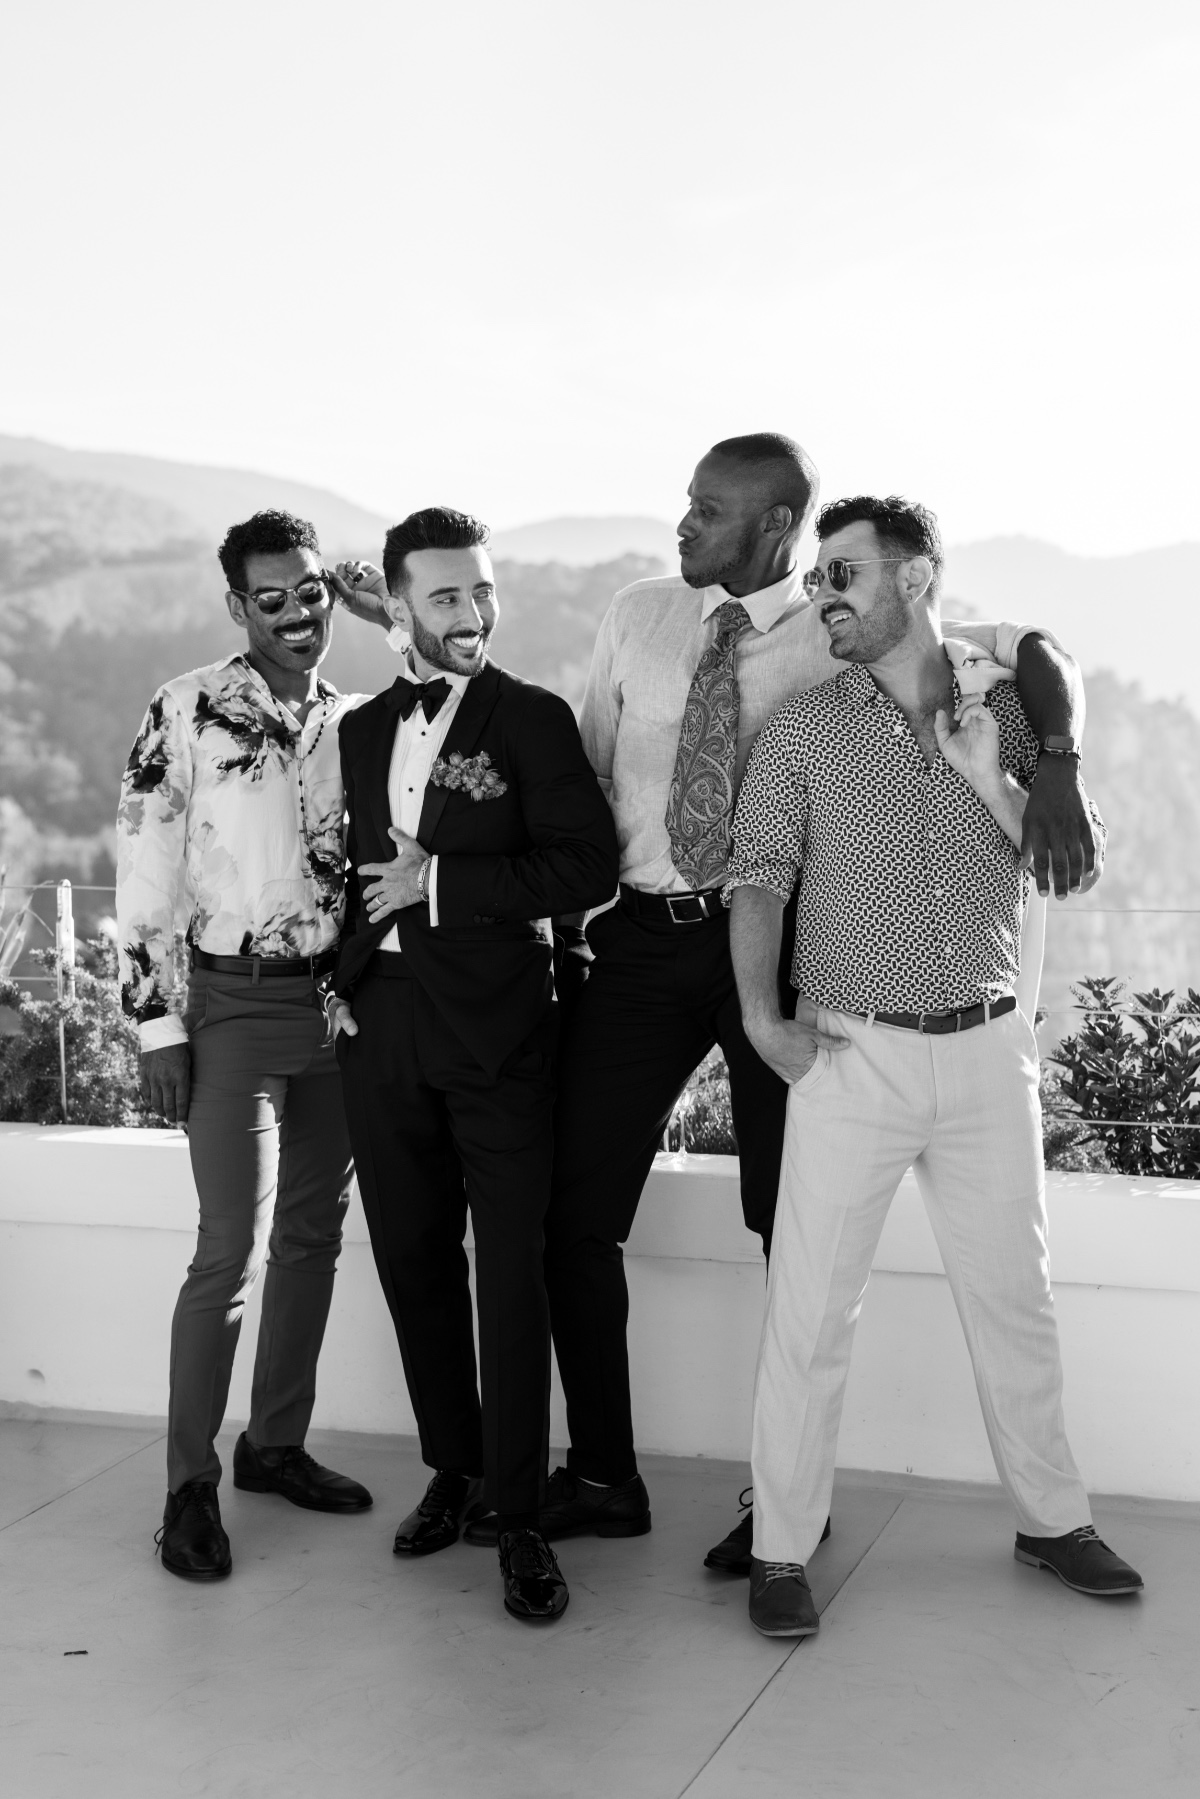 Chic and stylish LGBTQ wedding guests in Ibiza Spain 